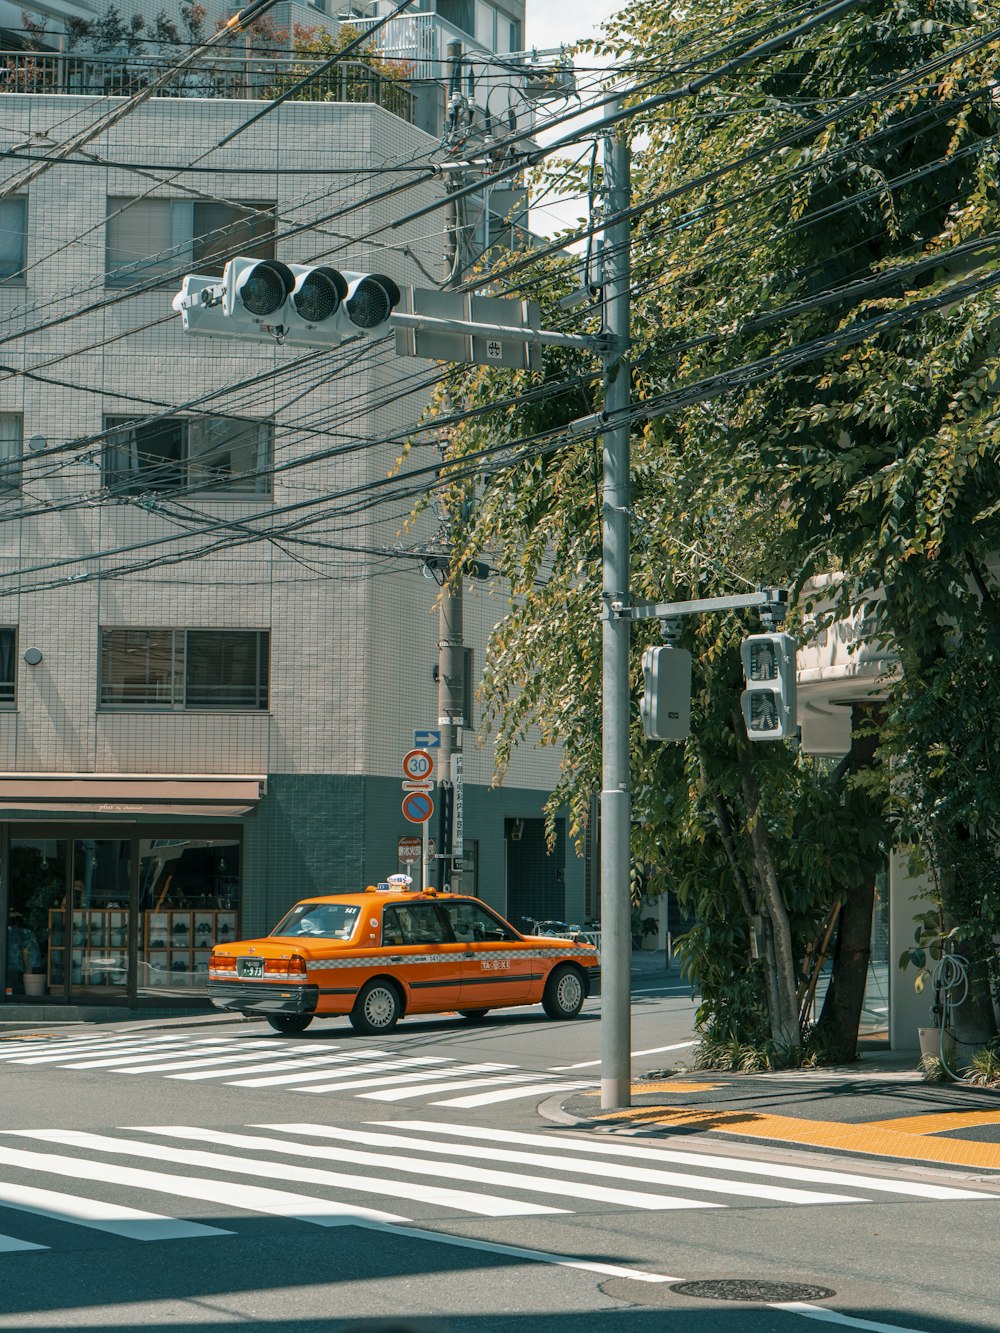 yellow cab on road during daytime